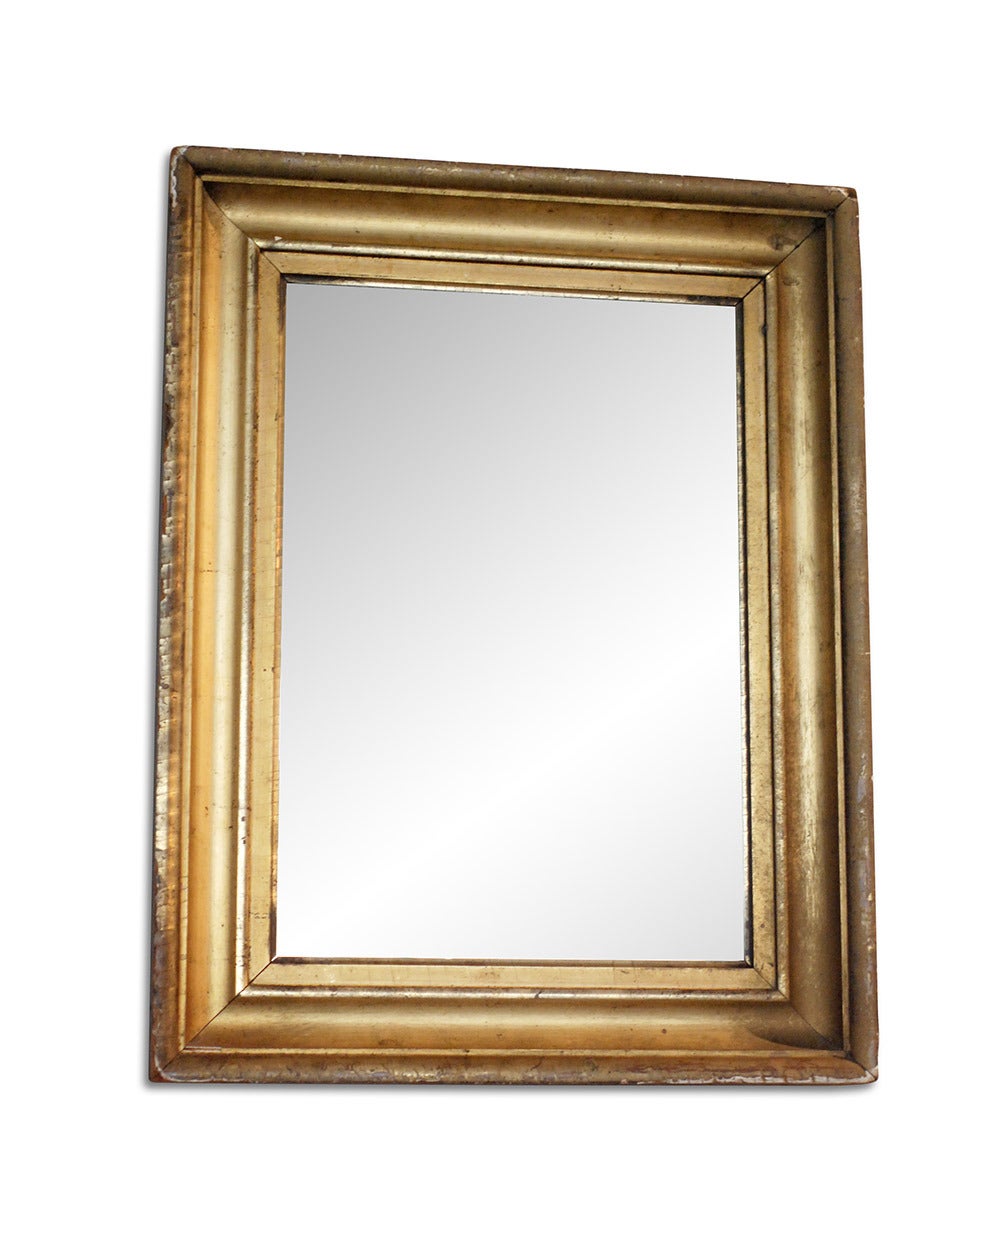 19th c. Water Gilded Frame with New Plate Mirror